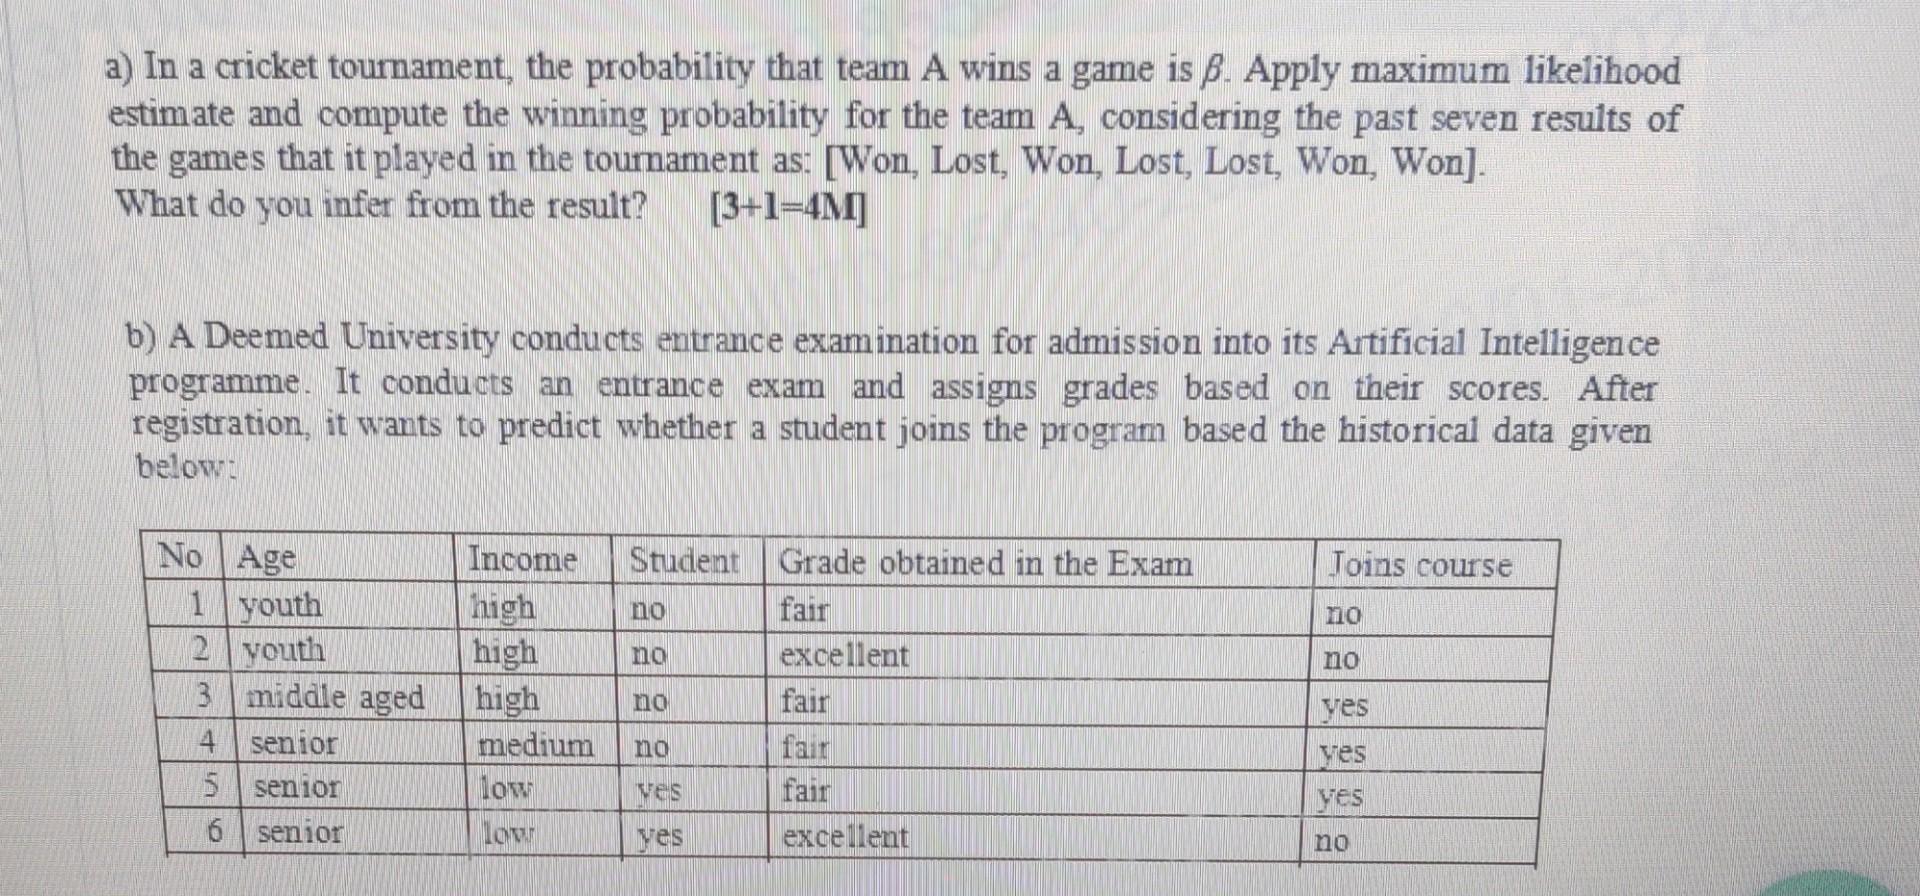 a) In a cricket tournament, the probability that team A wins a game is . Apply maximum likelihood estimate